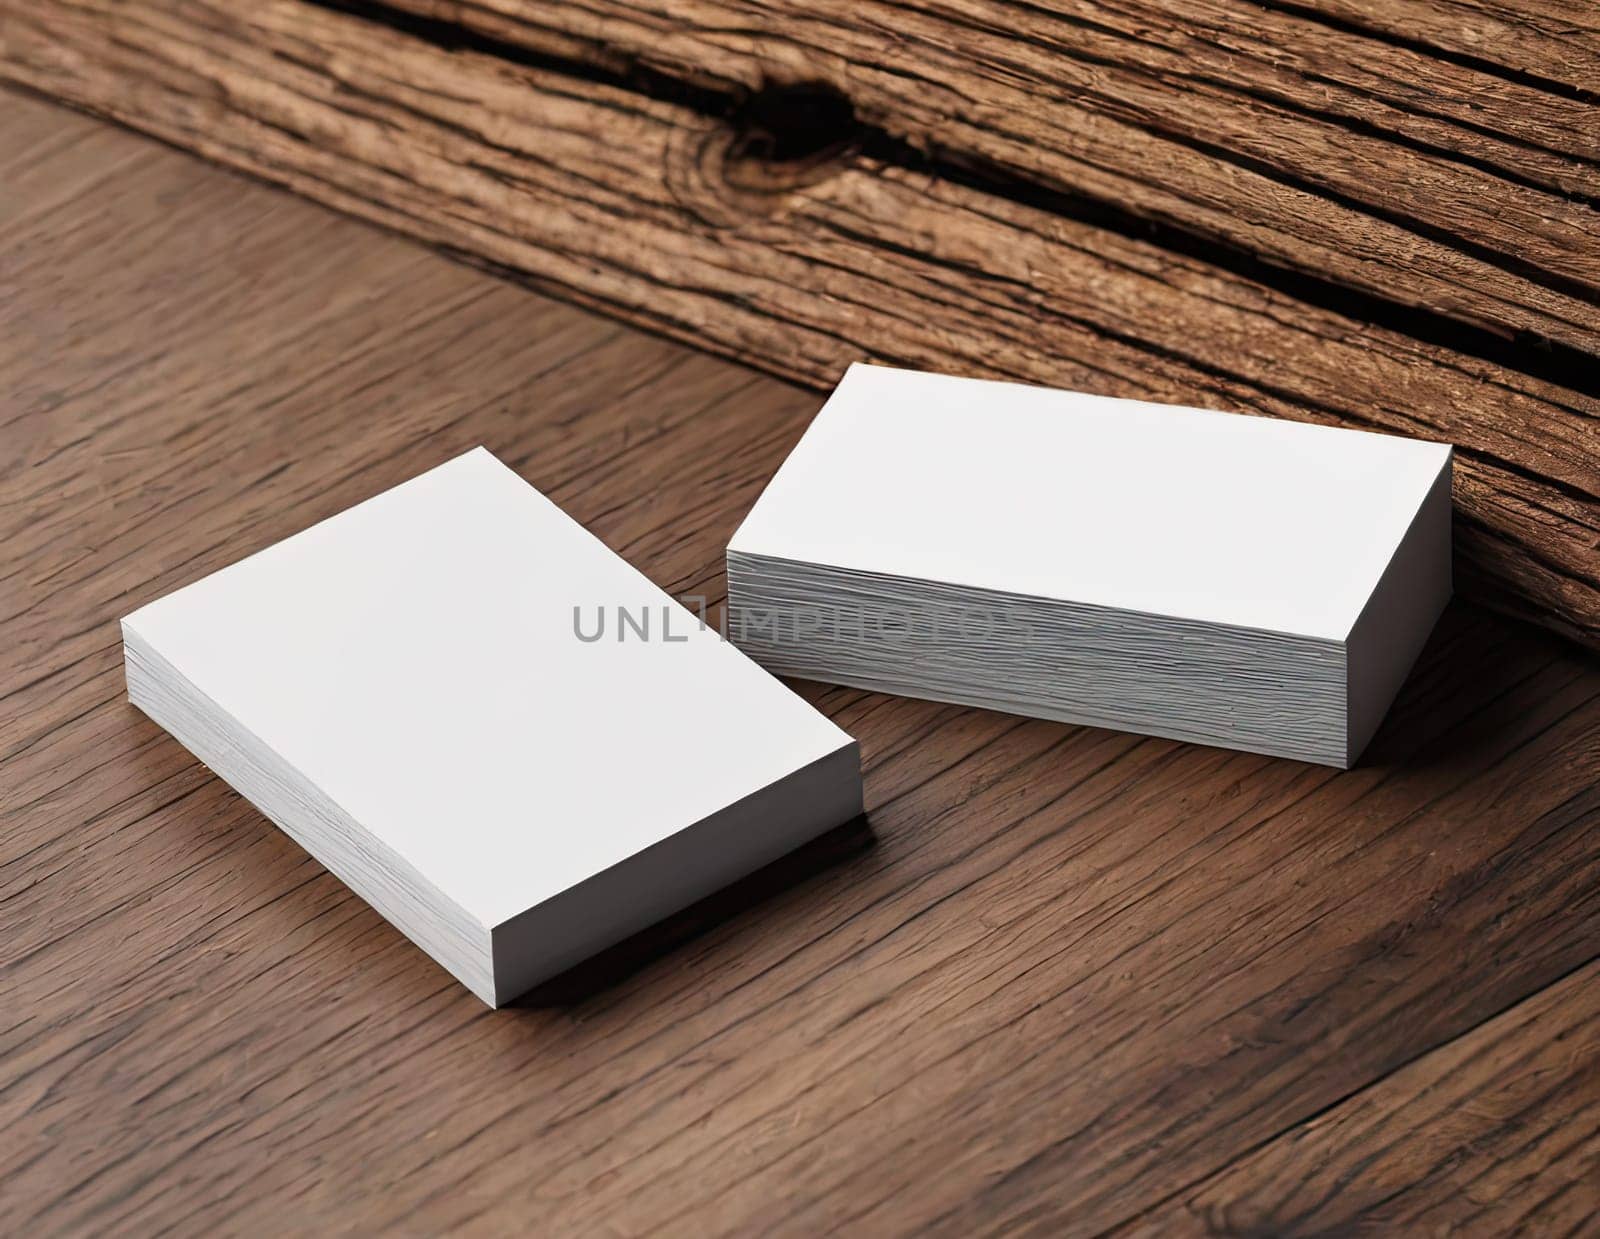 blank white cards on wooden surface/background